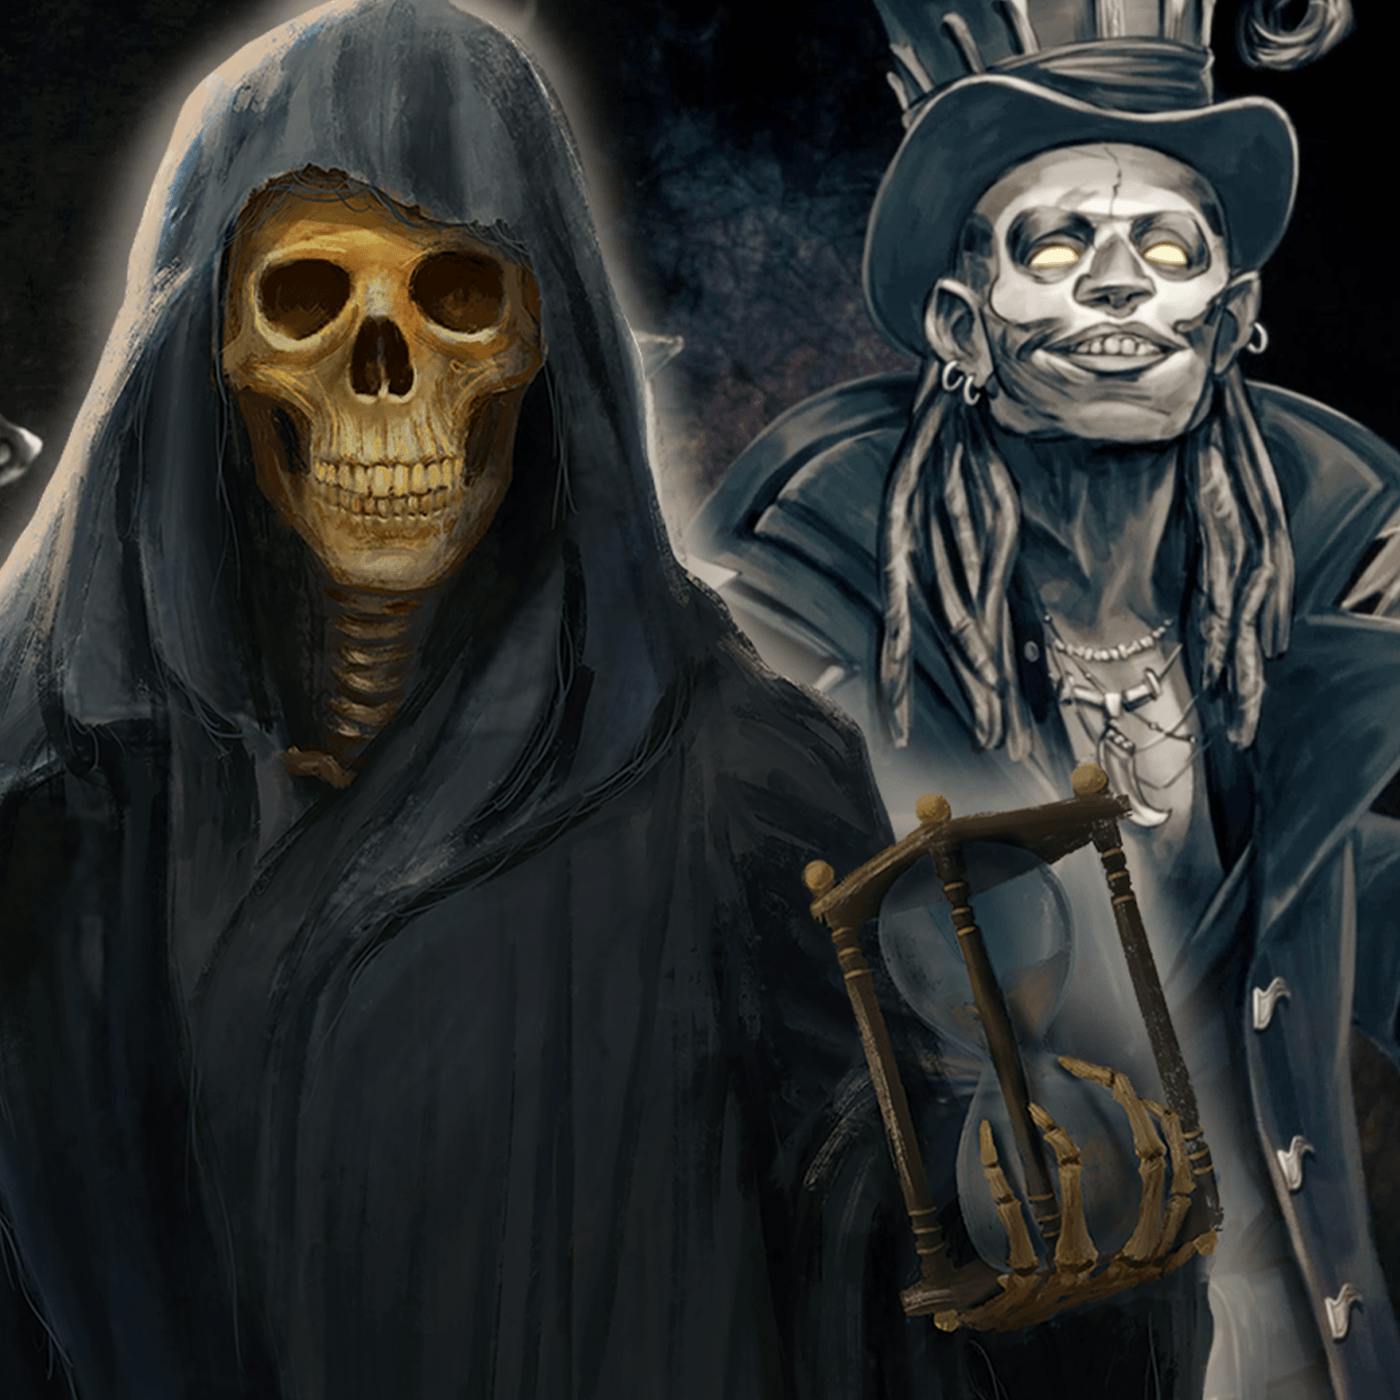 Episode 51: The History of the Grim Reaper & the Deities of Death